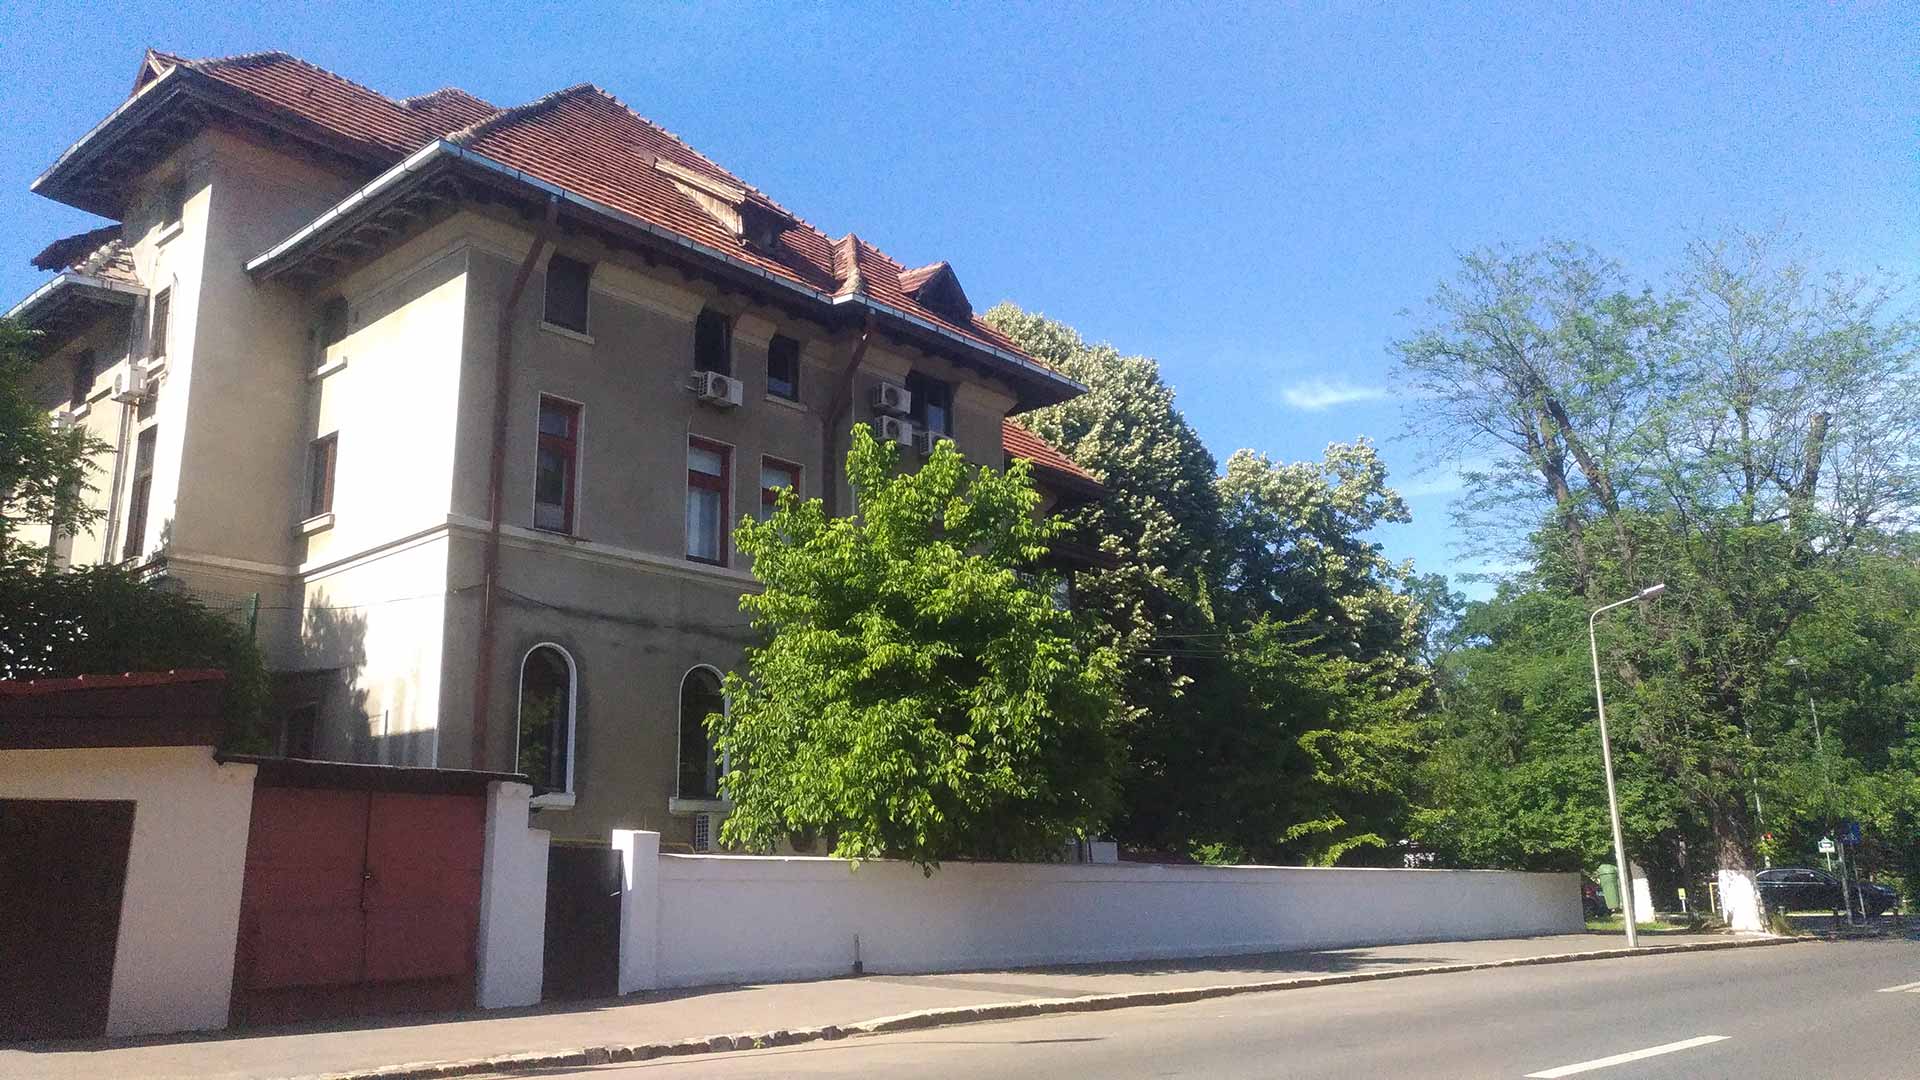 Mihai Radulescu bought all the apartments in this building in the heart of Bucharest. More than a dozen companies were registered at the address; almost all went into insolvency due to unpaid debts. 